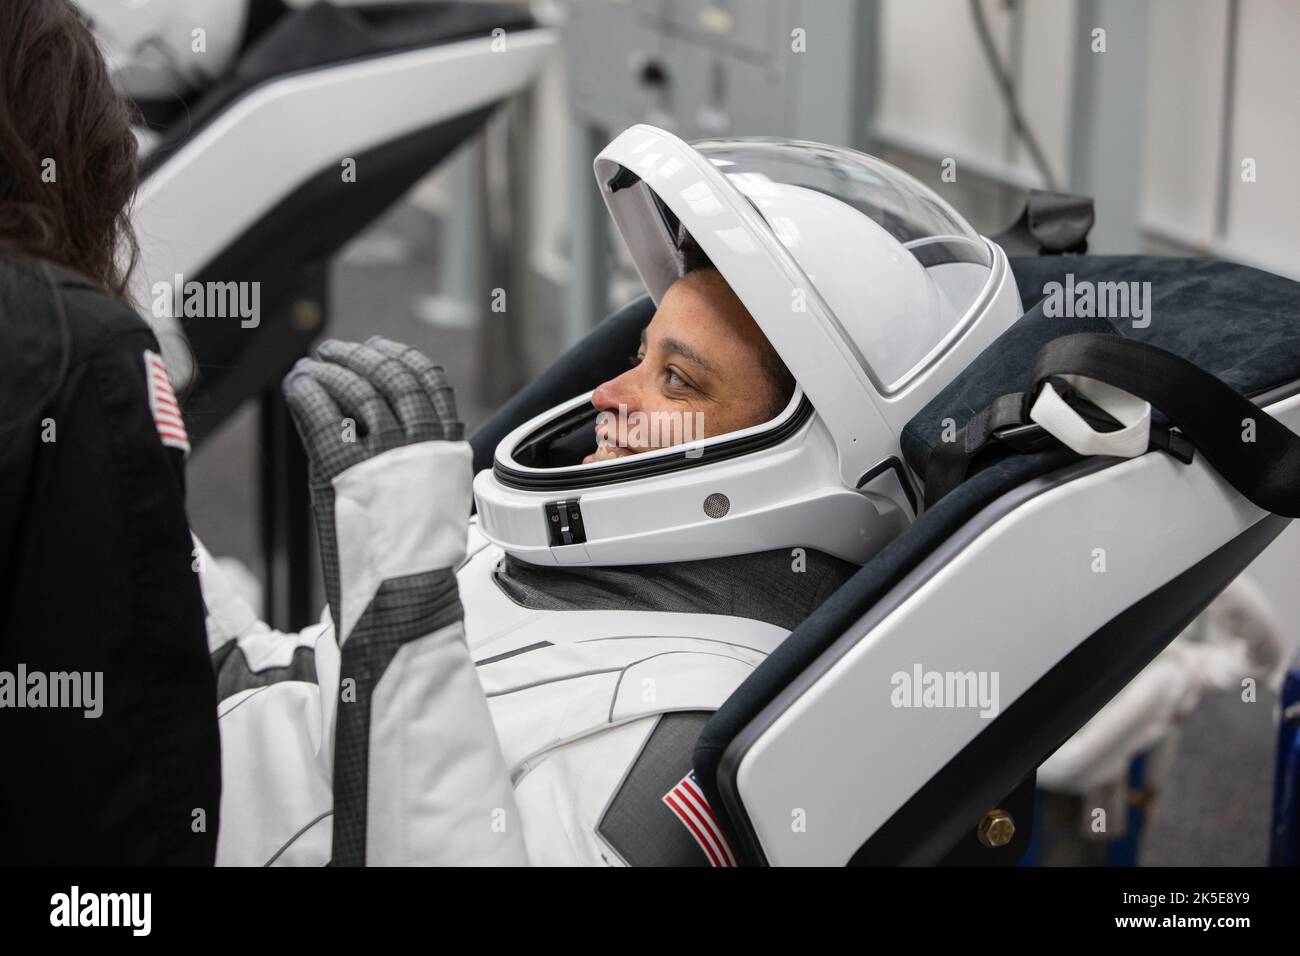 Crew-4 mission astronaut Jessica Watkins relaxes in the suit room in the Astronaut Crew Quarters inside Kennedy Space Center’s Neil A. Armstrong Operations and Checkout Building on April 27, 2022. A team of SpaceX suit technicians assisted the crew as they put on their custom-fitted spacesuits and checked the suits for leaks. Watkins, along with Bob Hines, Kjell Lindgren, and Samantha Cristoforetti, will launch aboard SpaceX’s Crew Dragon, powered by the company’s Falcon 9 rocket, to the International Space Station as part of NASA’s Commercial Crew Program. Crew-4 is scheduled to lift off toda Stock Photo